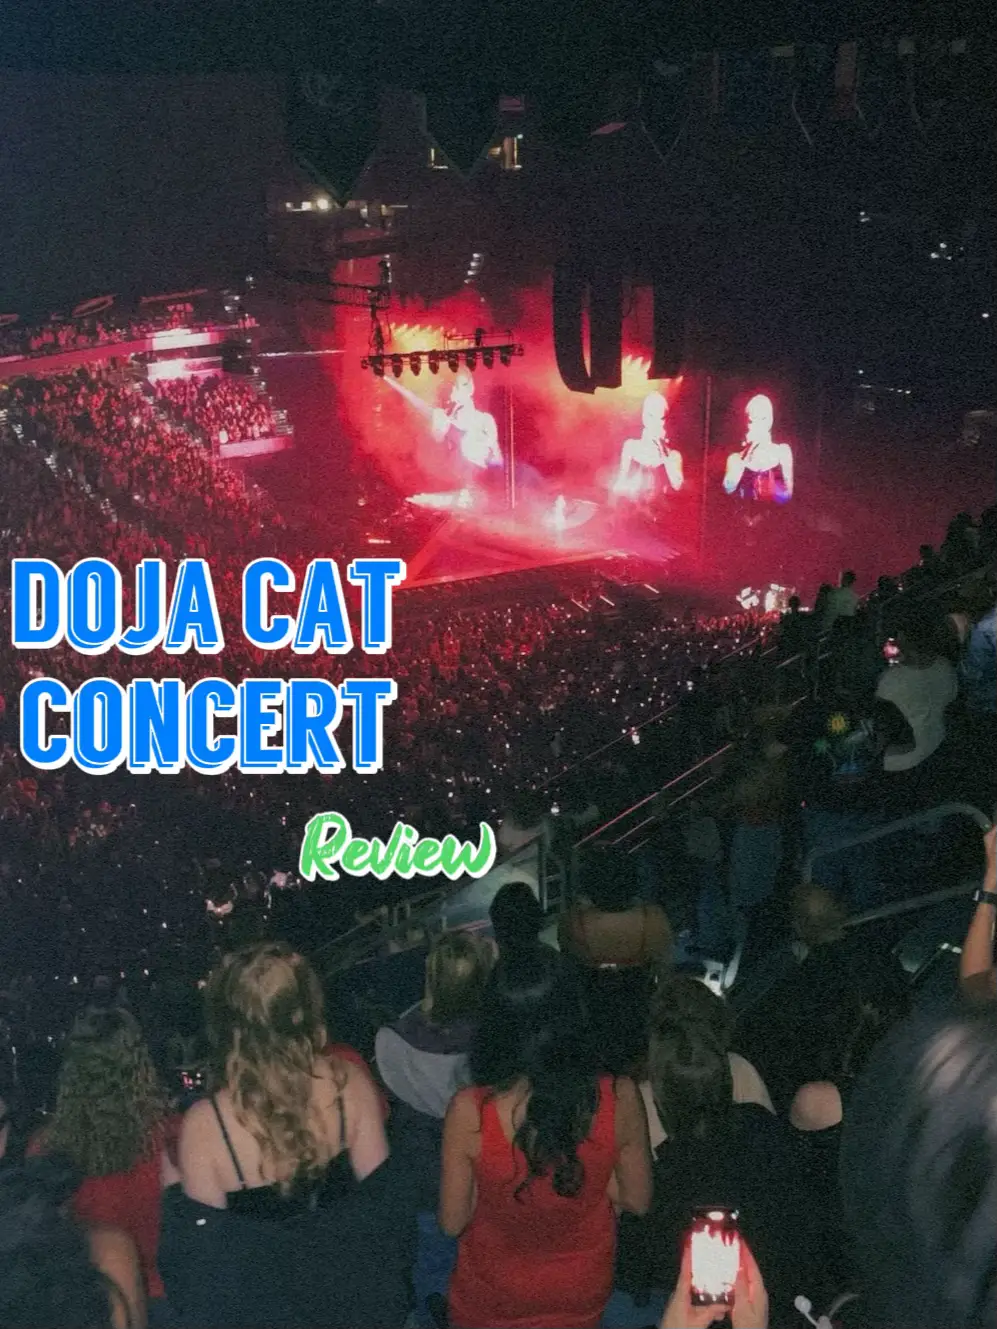  A concert of Doja Cat is being played in a stadium.